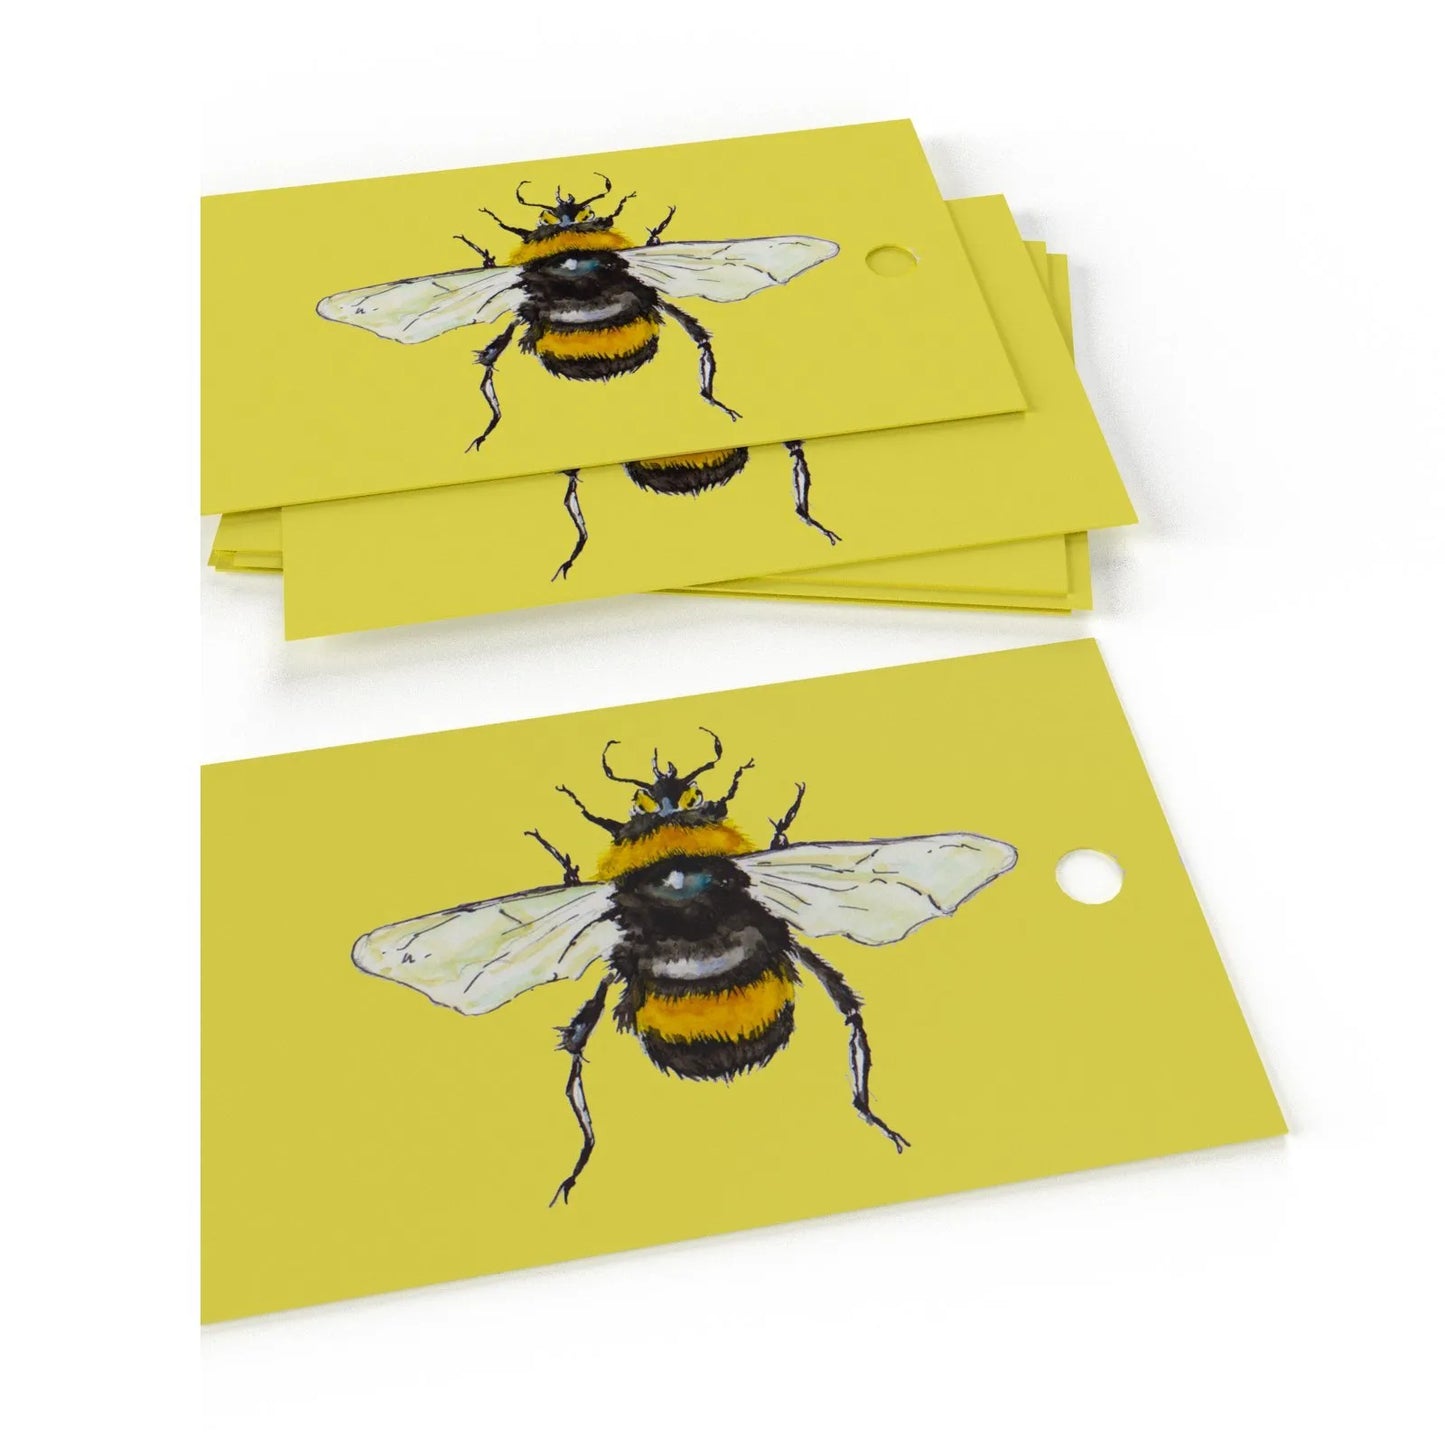 Wrapping Paper & Gift Tag - Yellow Bees by Sophie Botsford